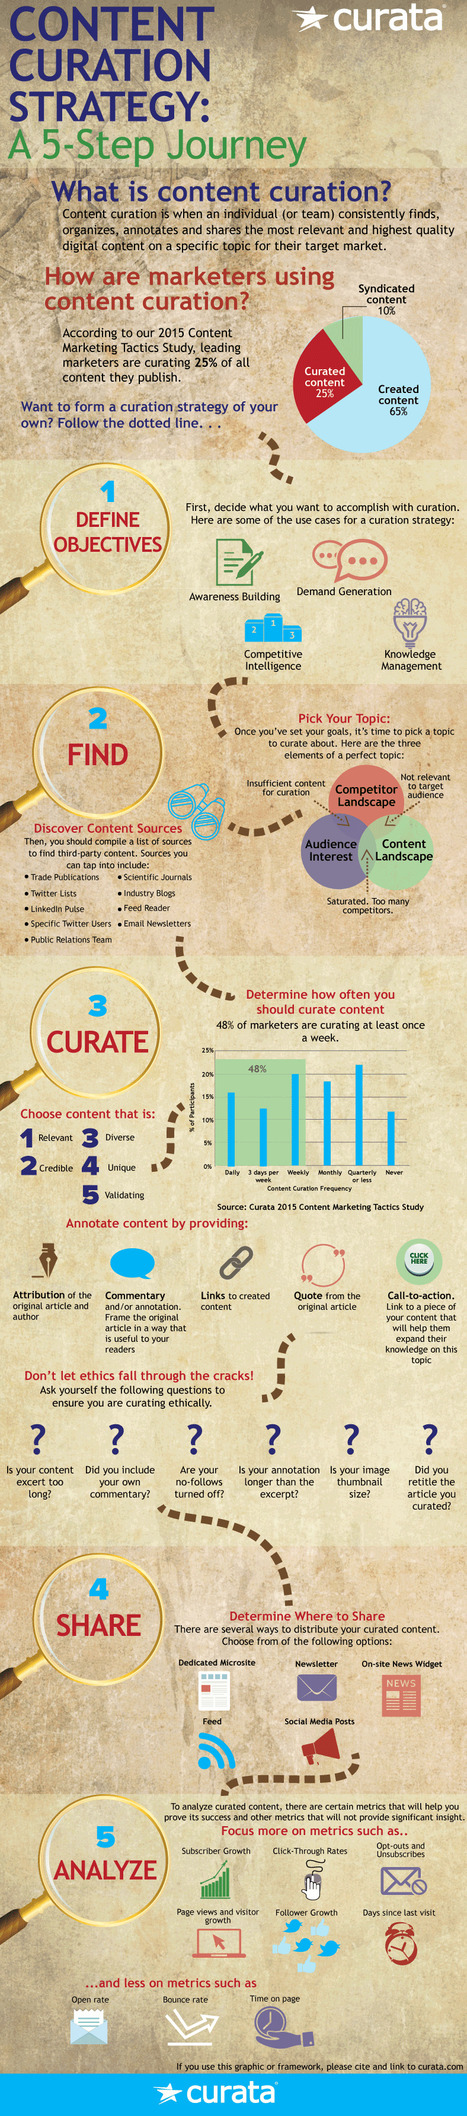 Content Curation Strategy: A 5-Step Journey #Infographic #contentcuration #marketing | Business Improvement and Social media | Scoop.it